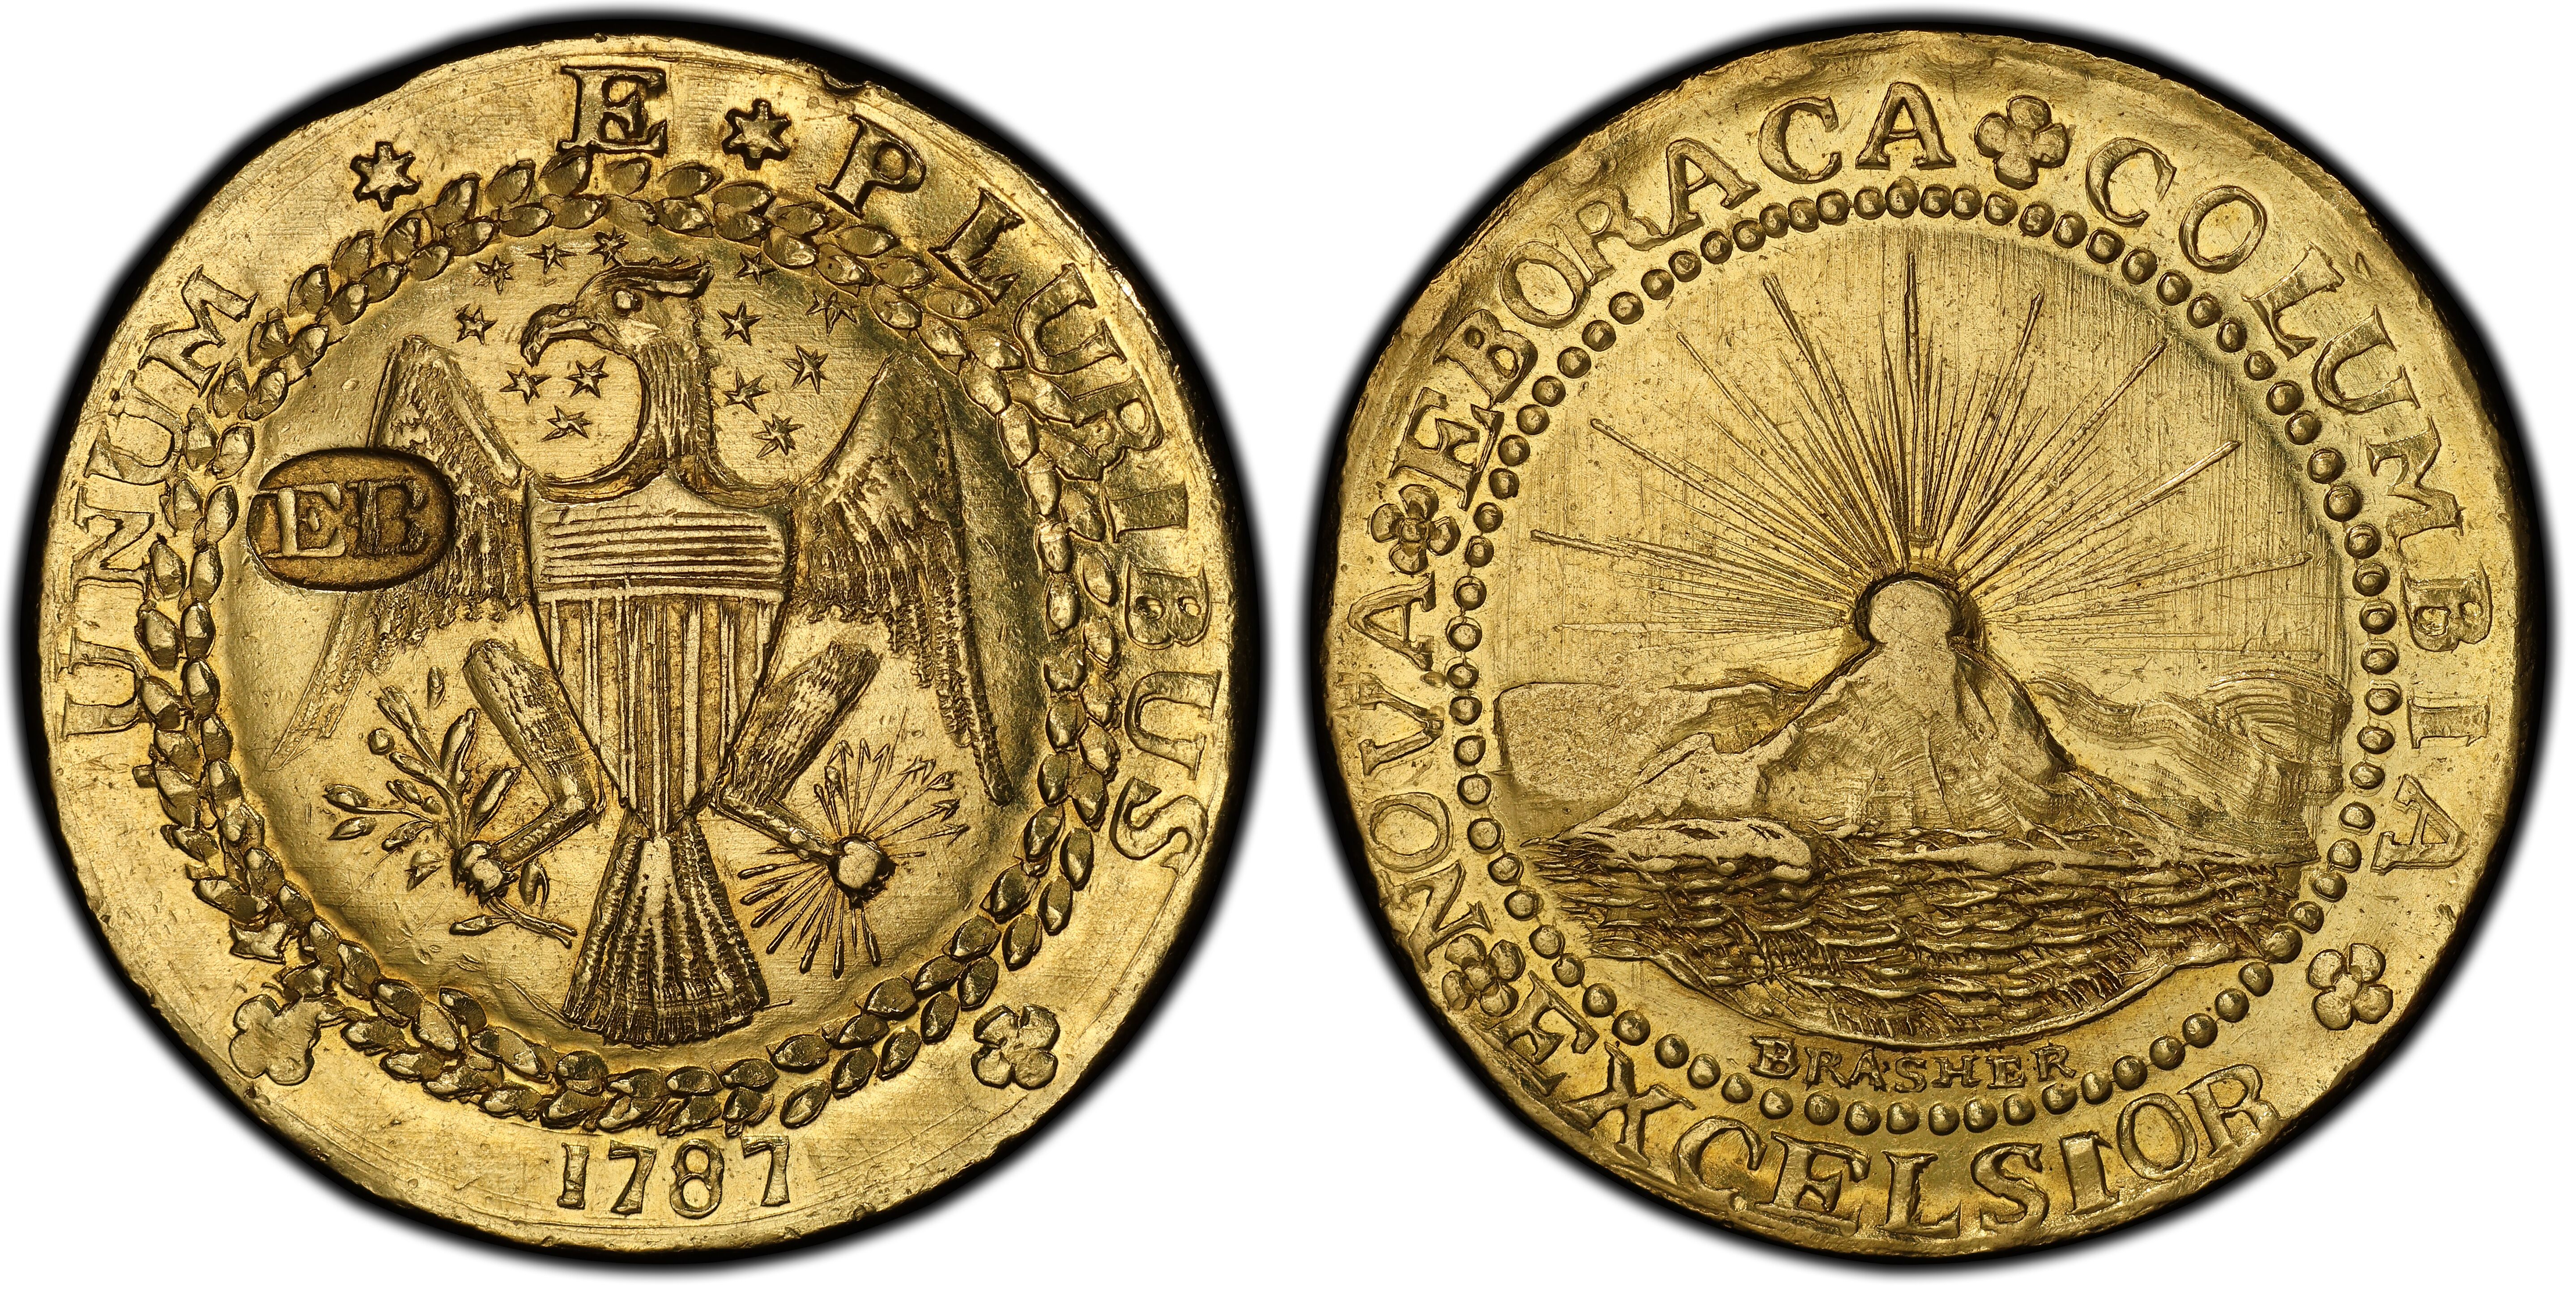 enlarged image for Historic Brasher Doubloon and New York Coppers in PCGS Exhibit at ANA Philadelphia Show